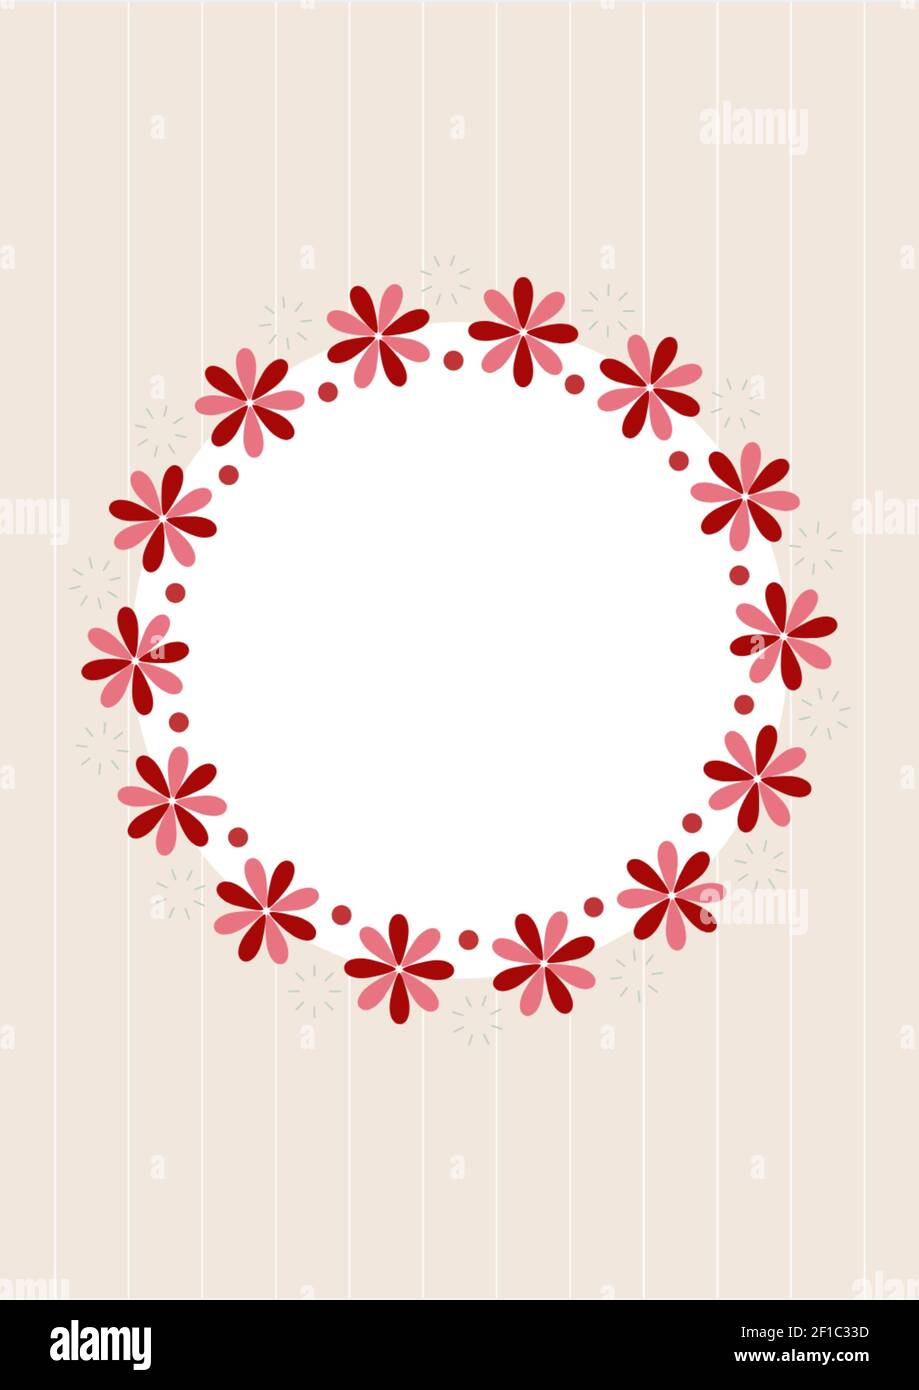 Composition of circular frame of repeated pink flower head design on off-white background Stock Photo